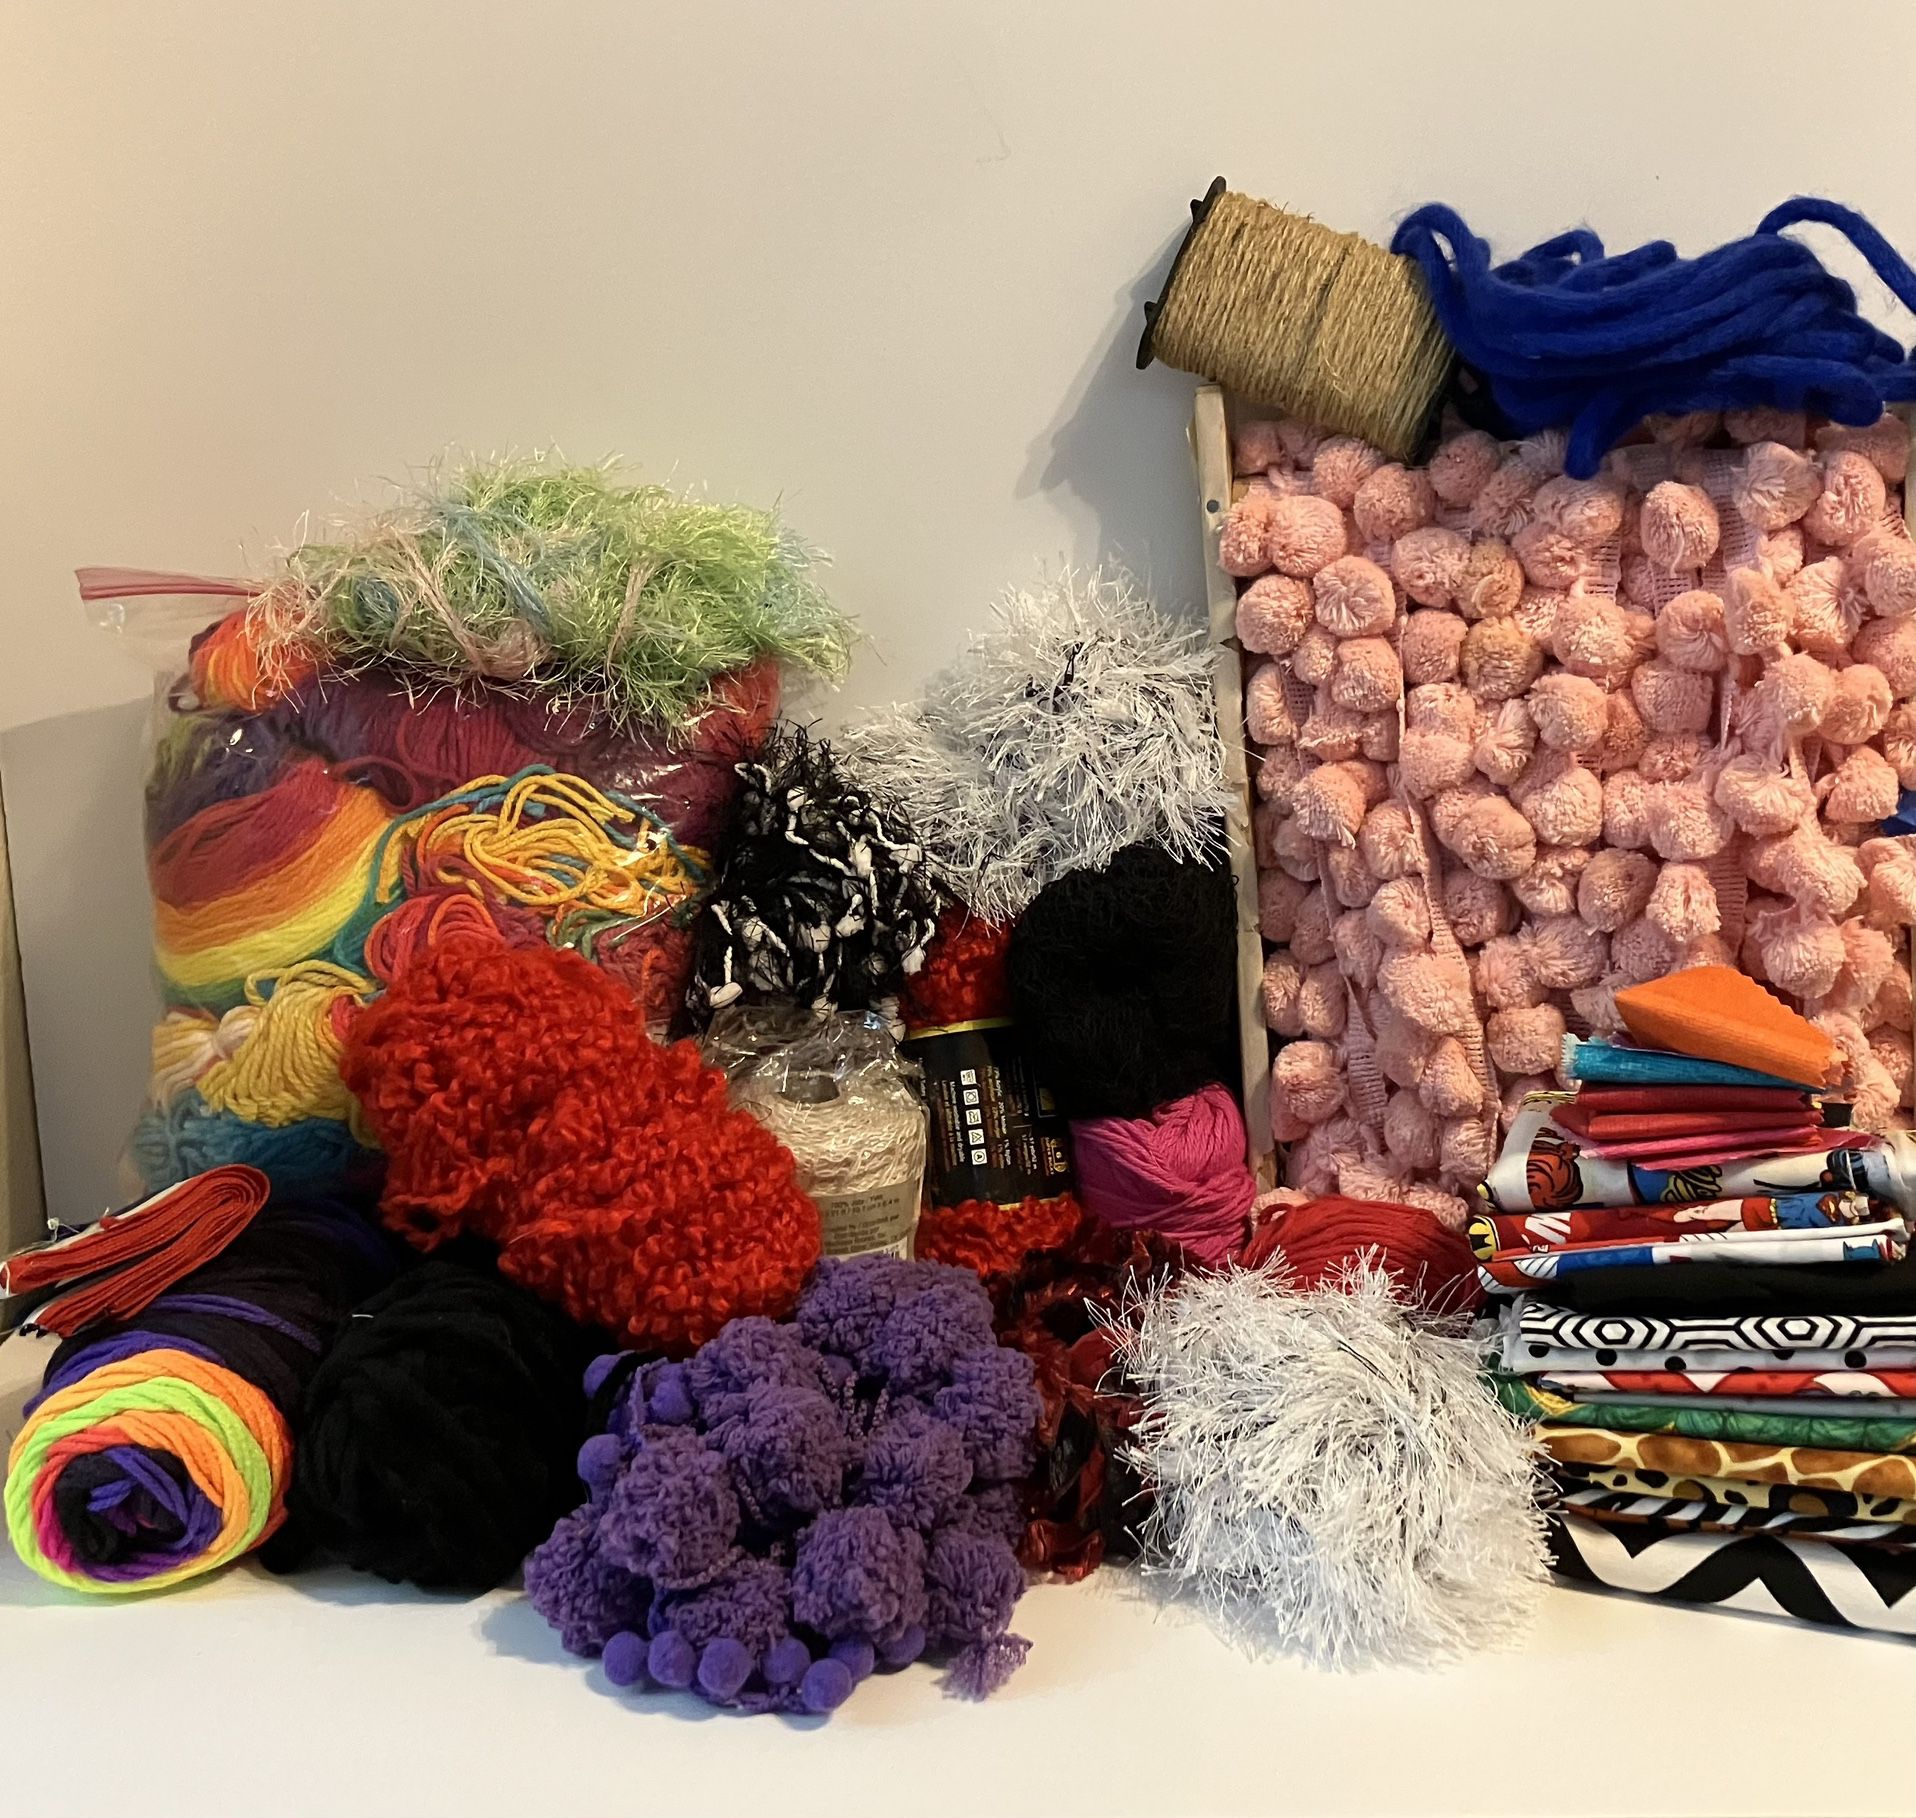 Crafts! Ribbons! Yarn! Brand New Items! Fabric!